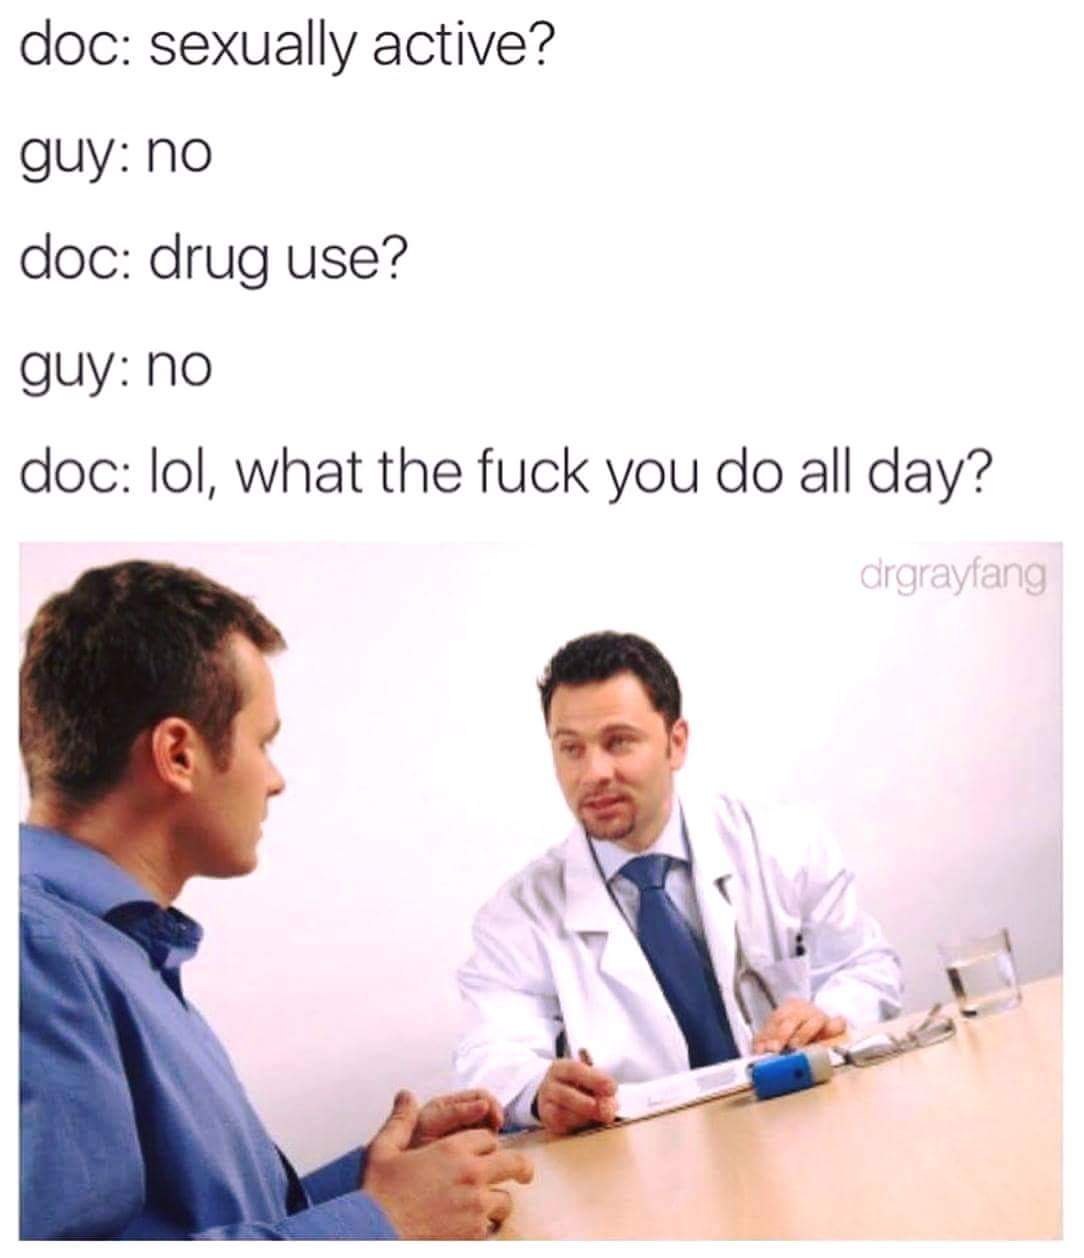 doctor memes - doc sexually active? guy no doc drug use? guy no doc lol, what the fuck you do all day? drgrayfang